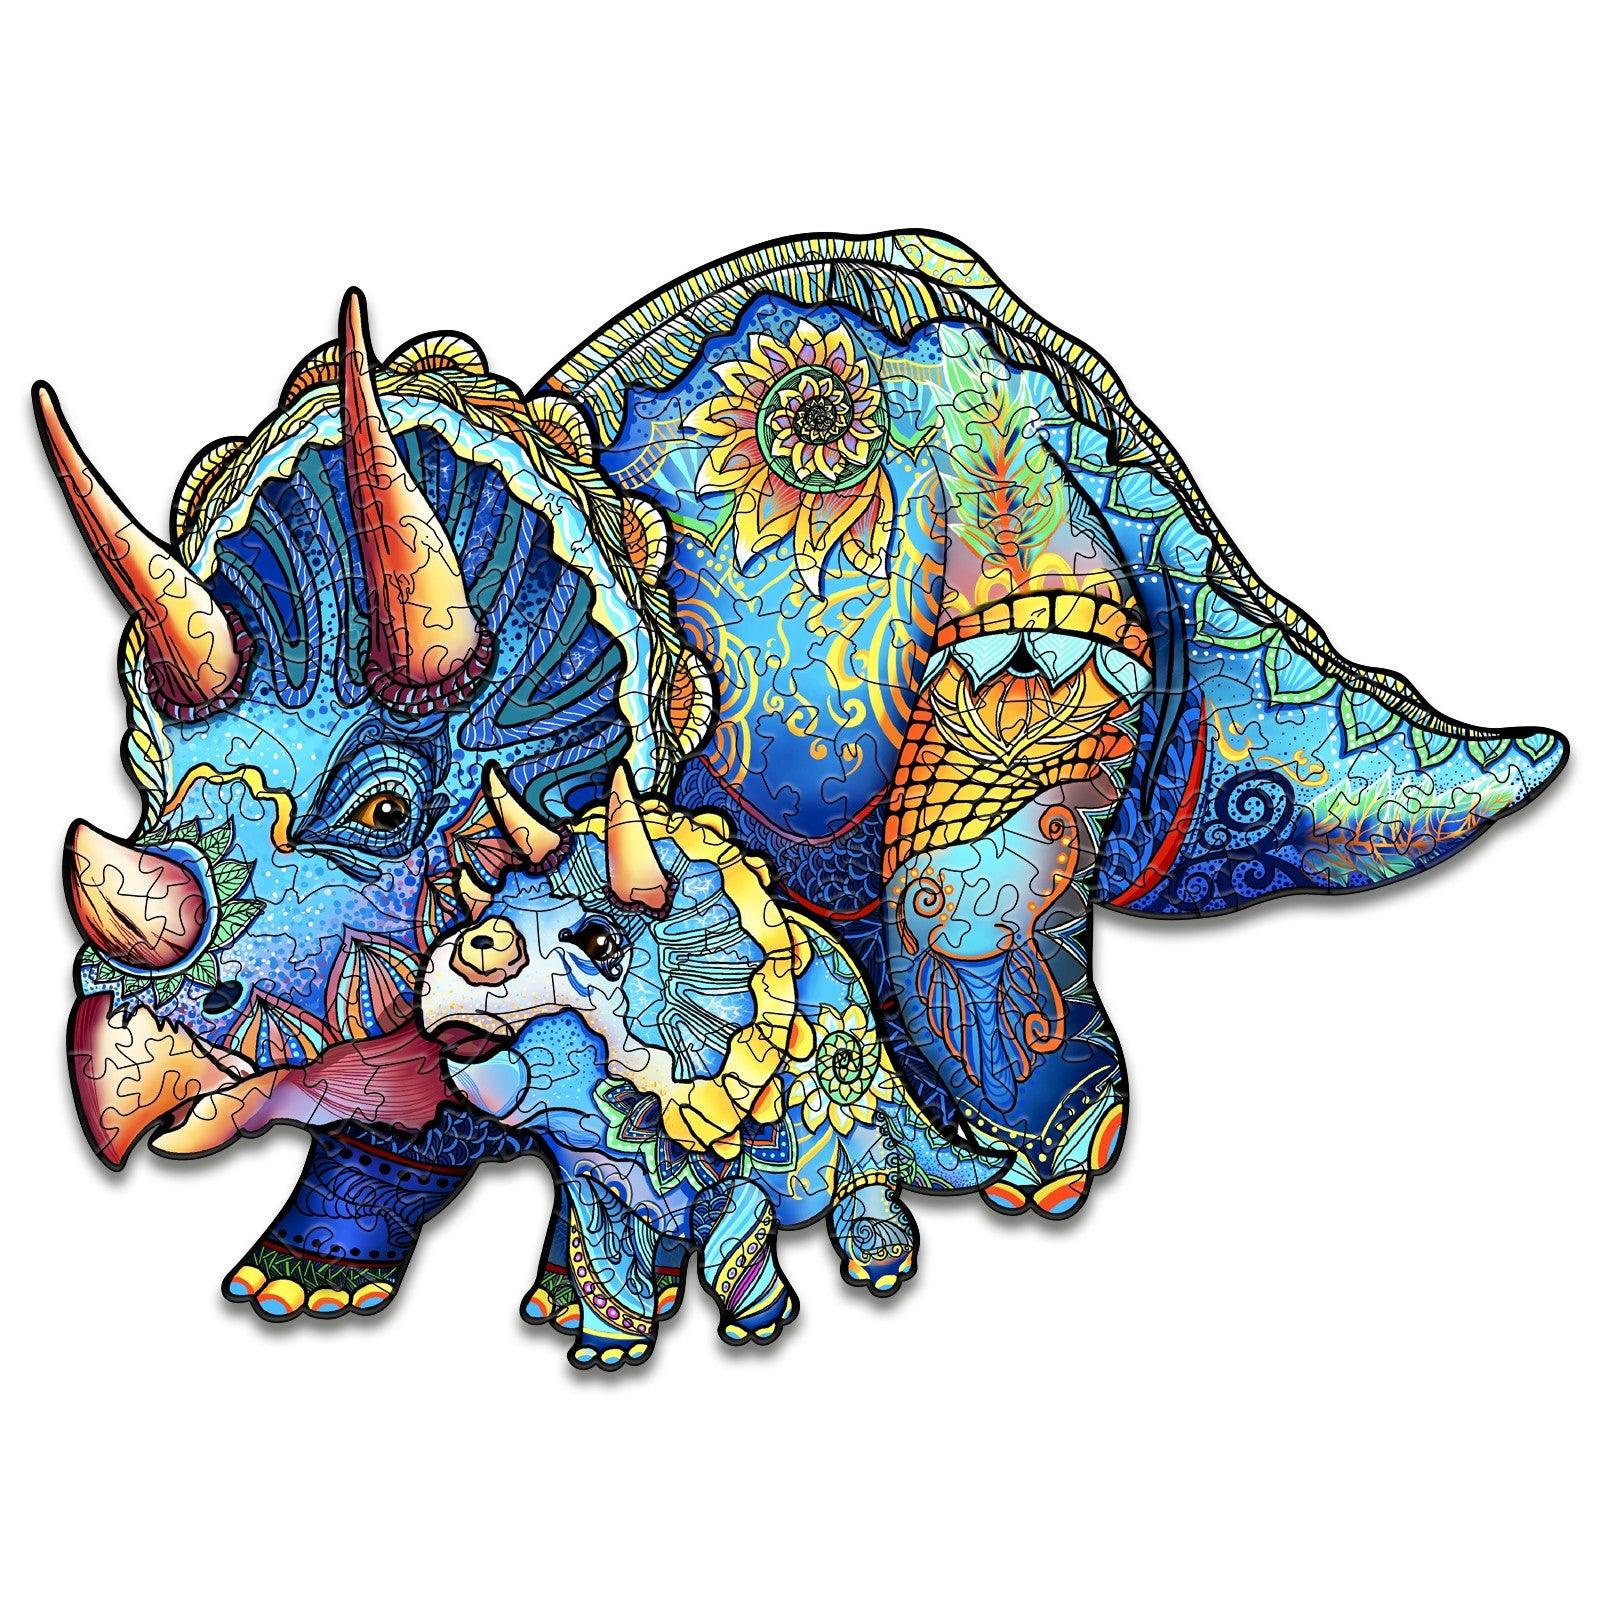 Triceratops Wooden Jigsaw Puzzle